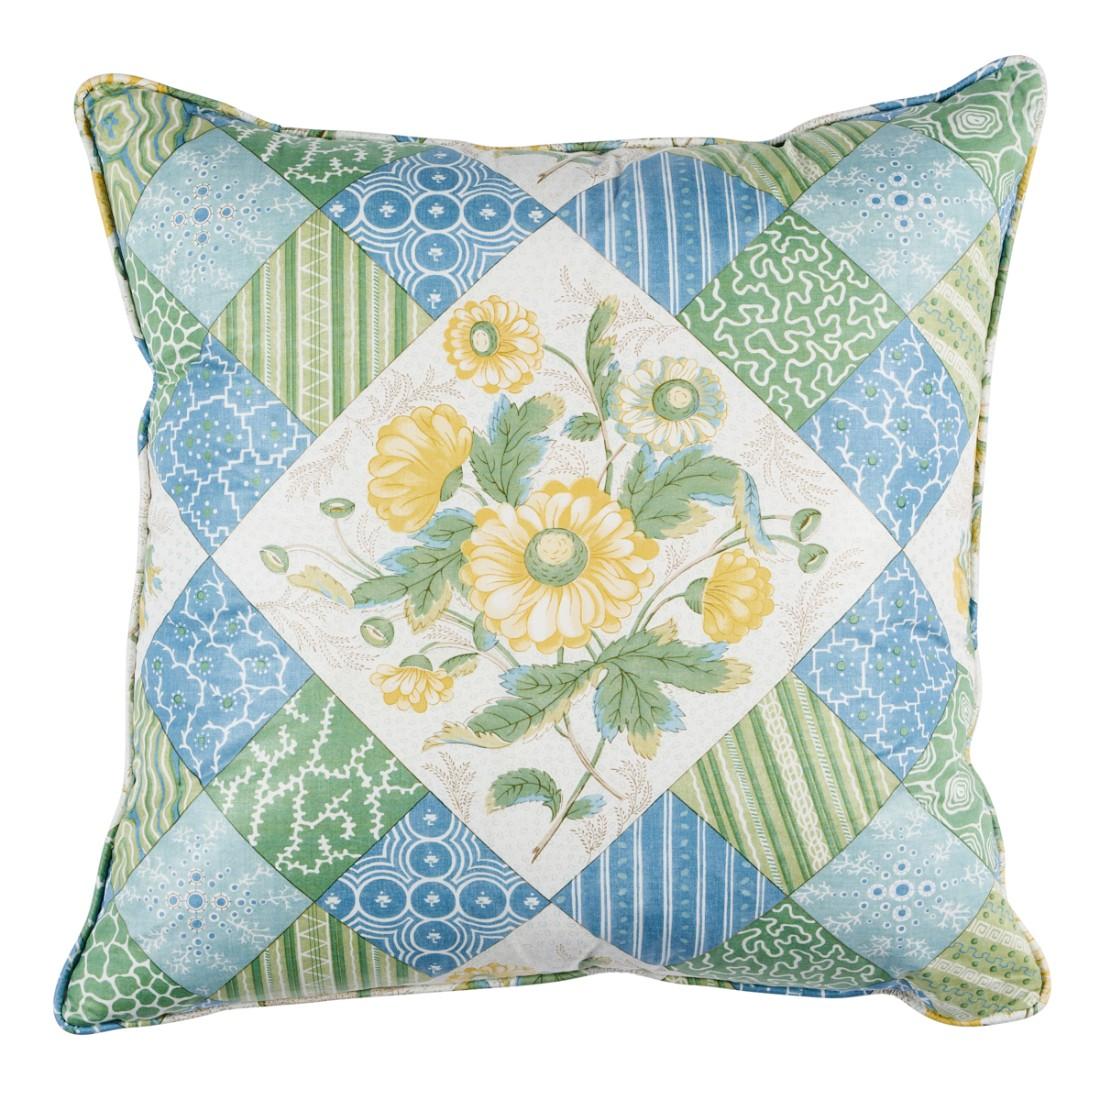 This pillow features Caldwell Patchwork with a self welt finish. Caldwell Patchwork Chintz in yellow-and-cornflower is a trompe l‘oeil quilted pattern where lovely floral bouquets are framed by an intricate and charming patchwork of graphic